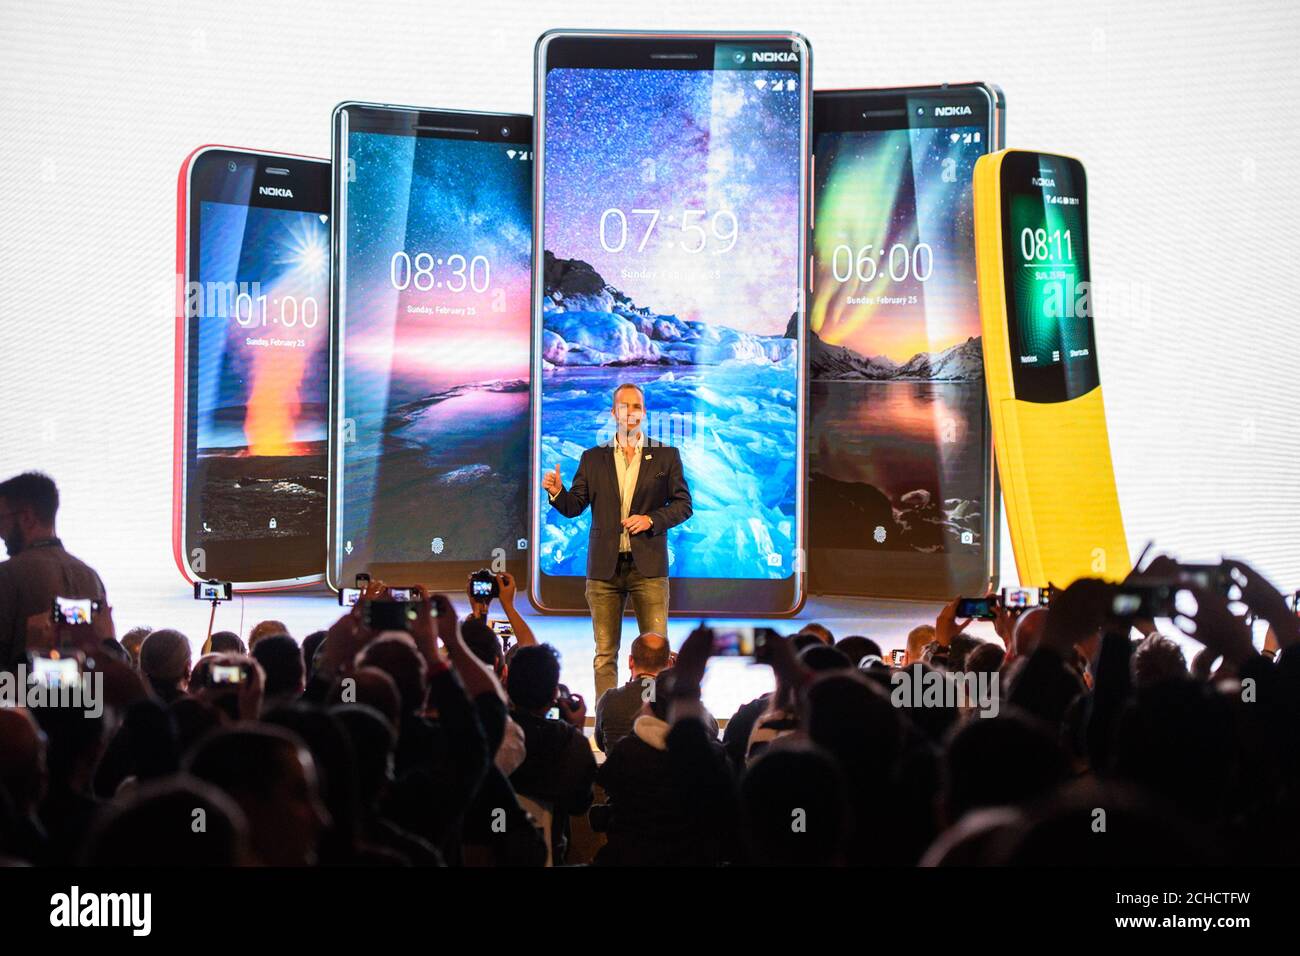 Juho Sarvikas, Chief Product Officer, HMD Global, announces on stage five new Nokia handsets, which include the Nokia 8 Sirocco, Nokia 7 Plus, the New Nokia 6, the Nokia 1 and the reloaded Nokia 8110 with 4G, at the Mobile World Congress in Barcelona. Stock Photo